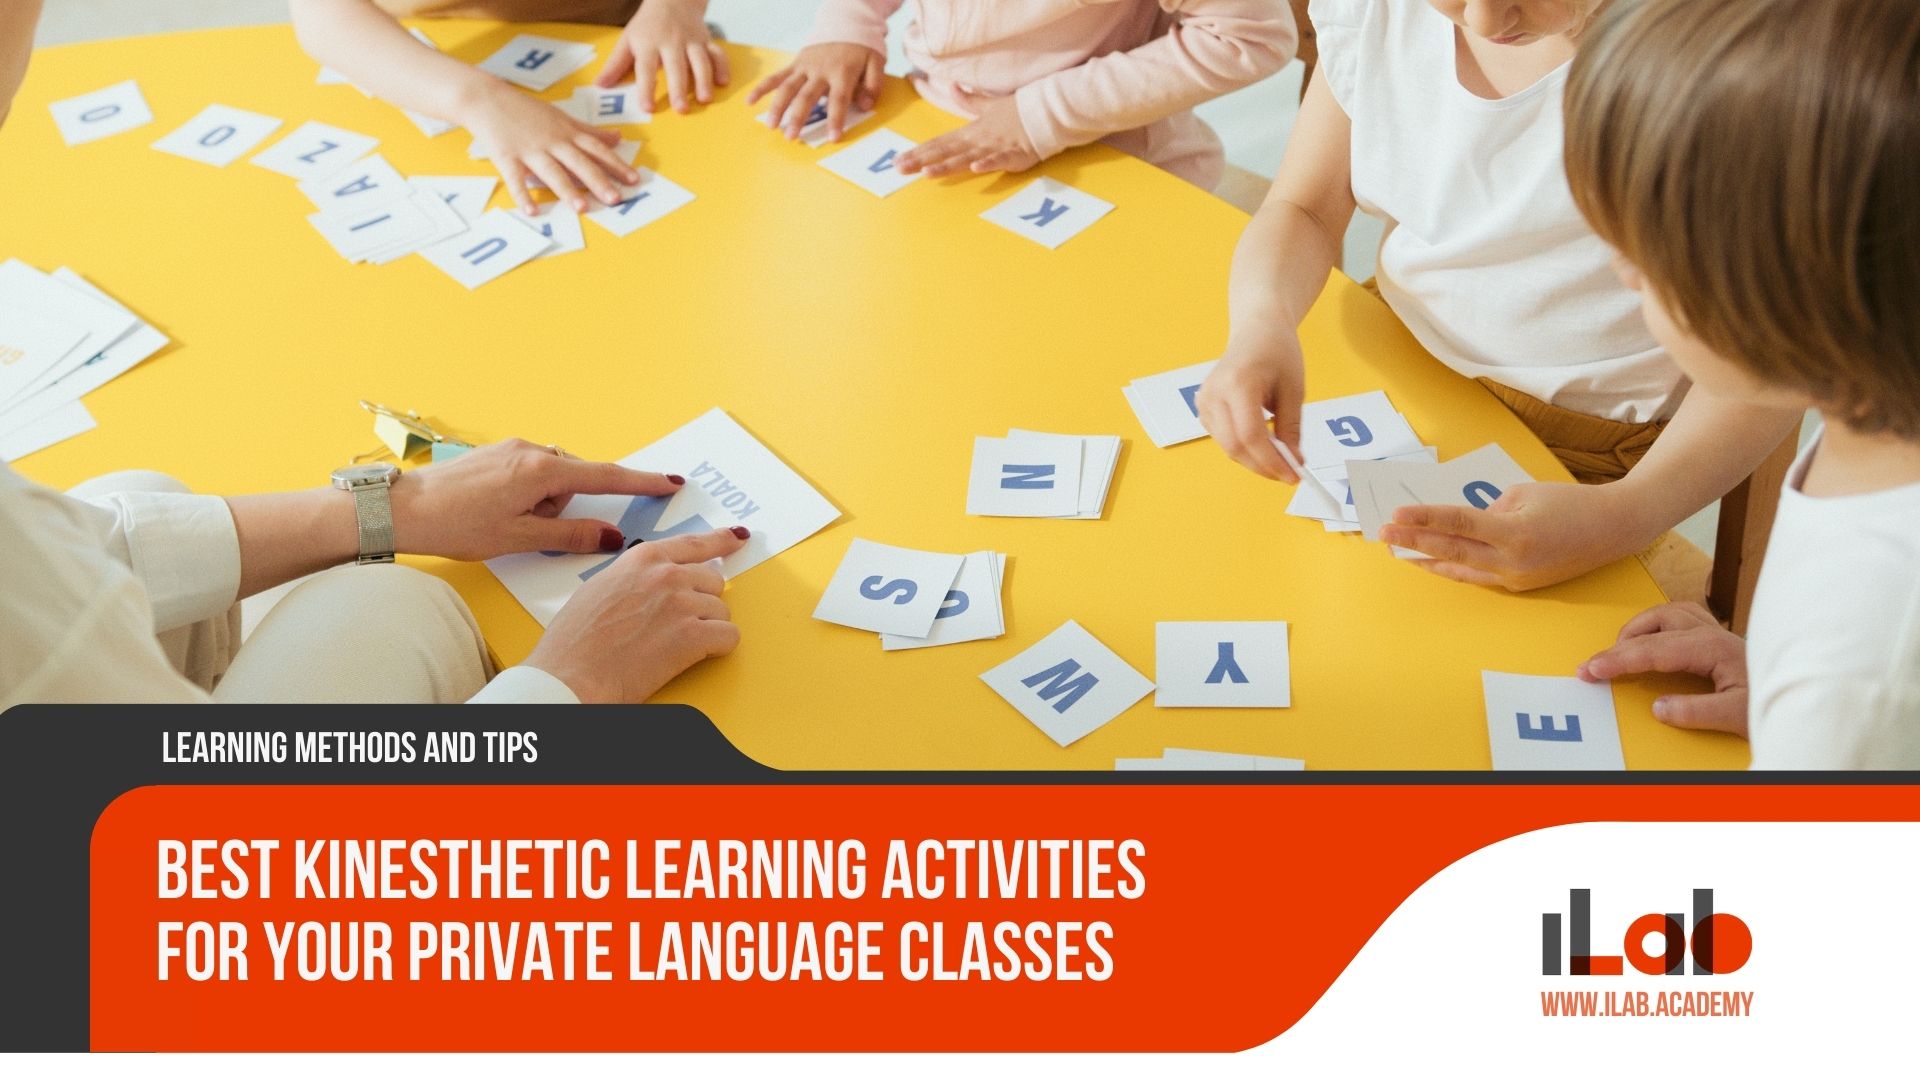 Best Kinesthetic Learning Activities for Your Private Language Classes